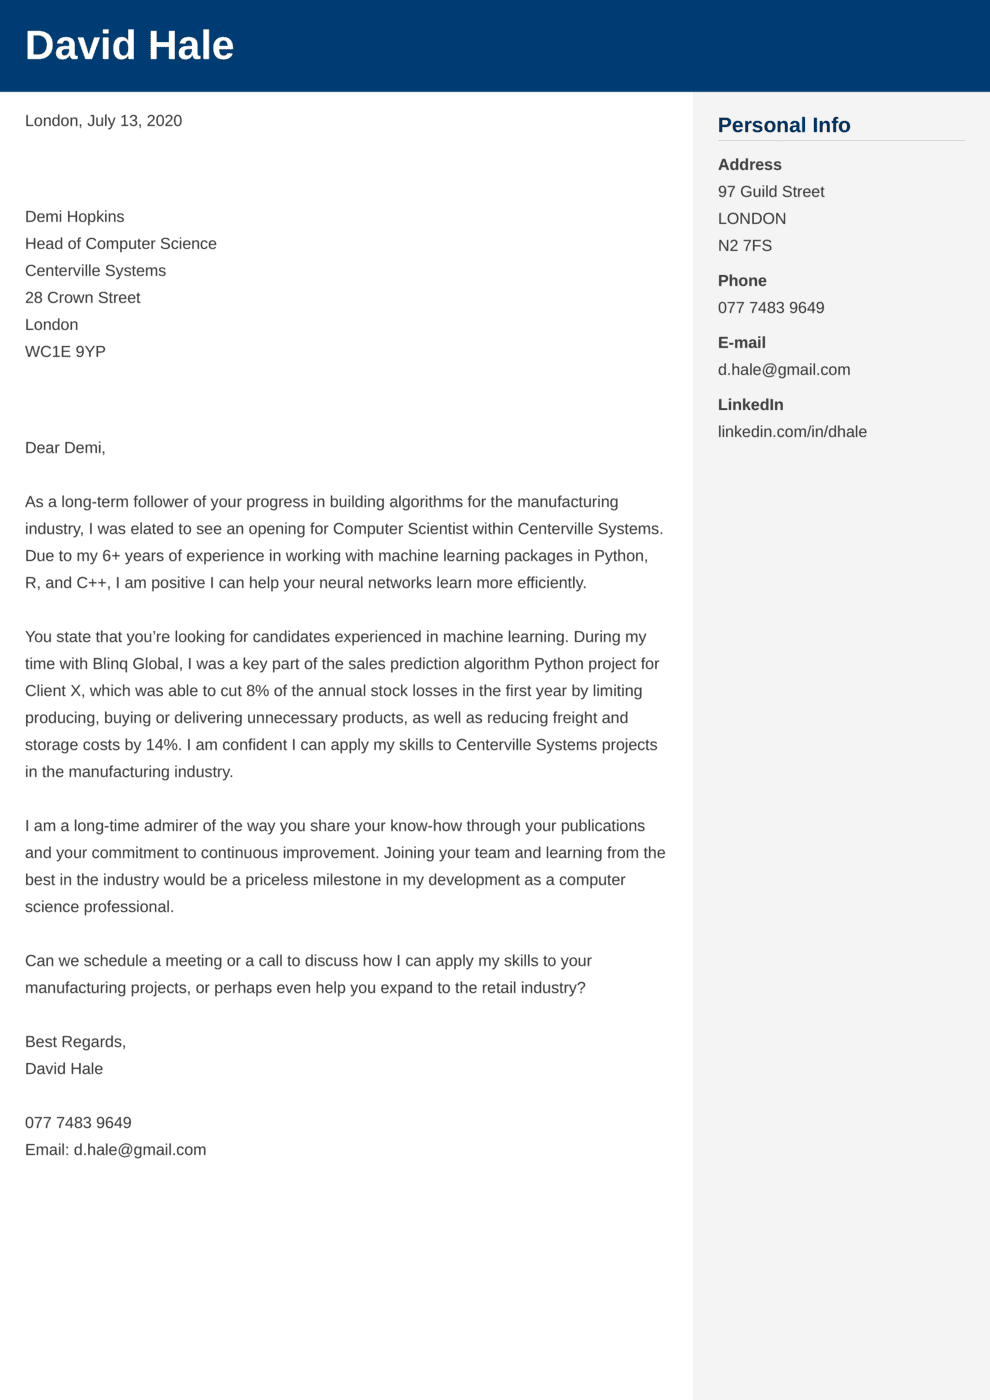 computer science position cover letter